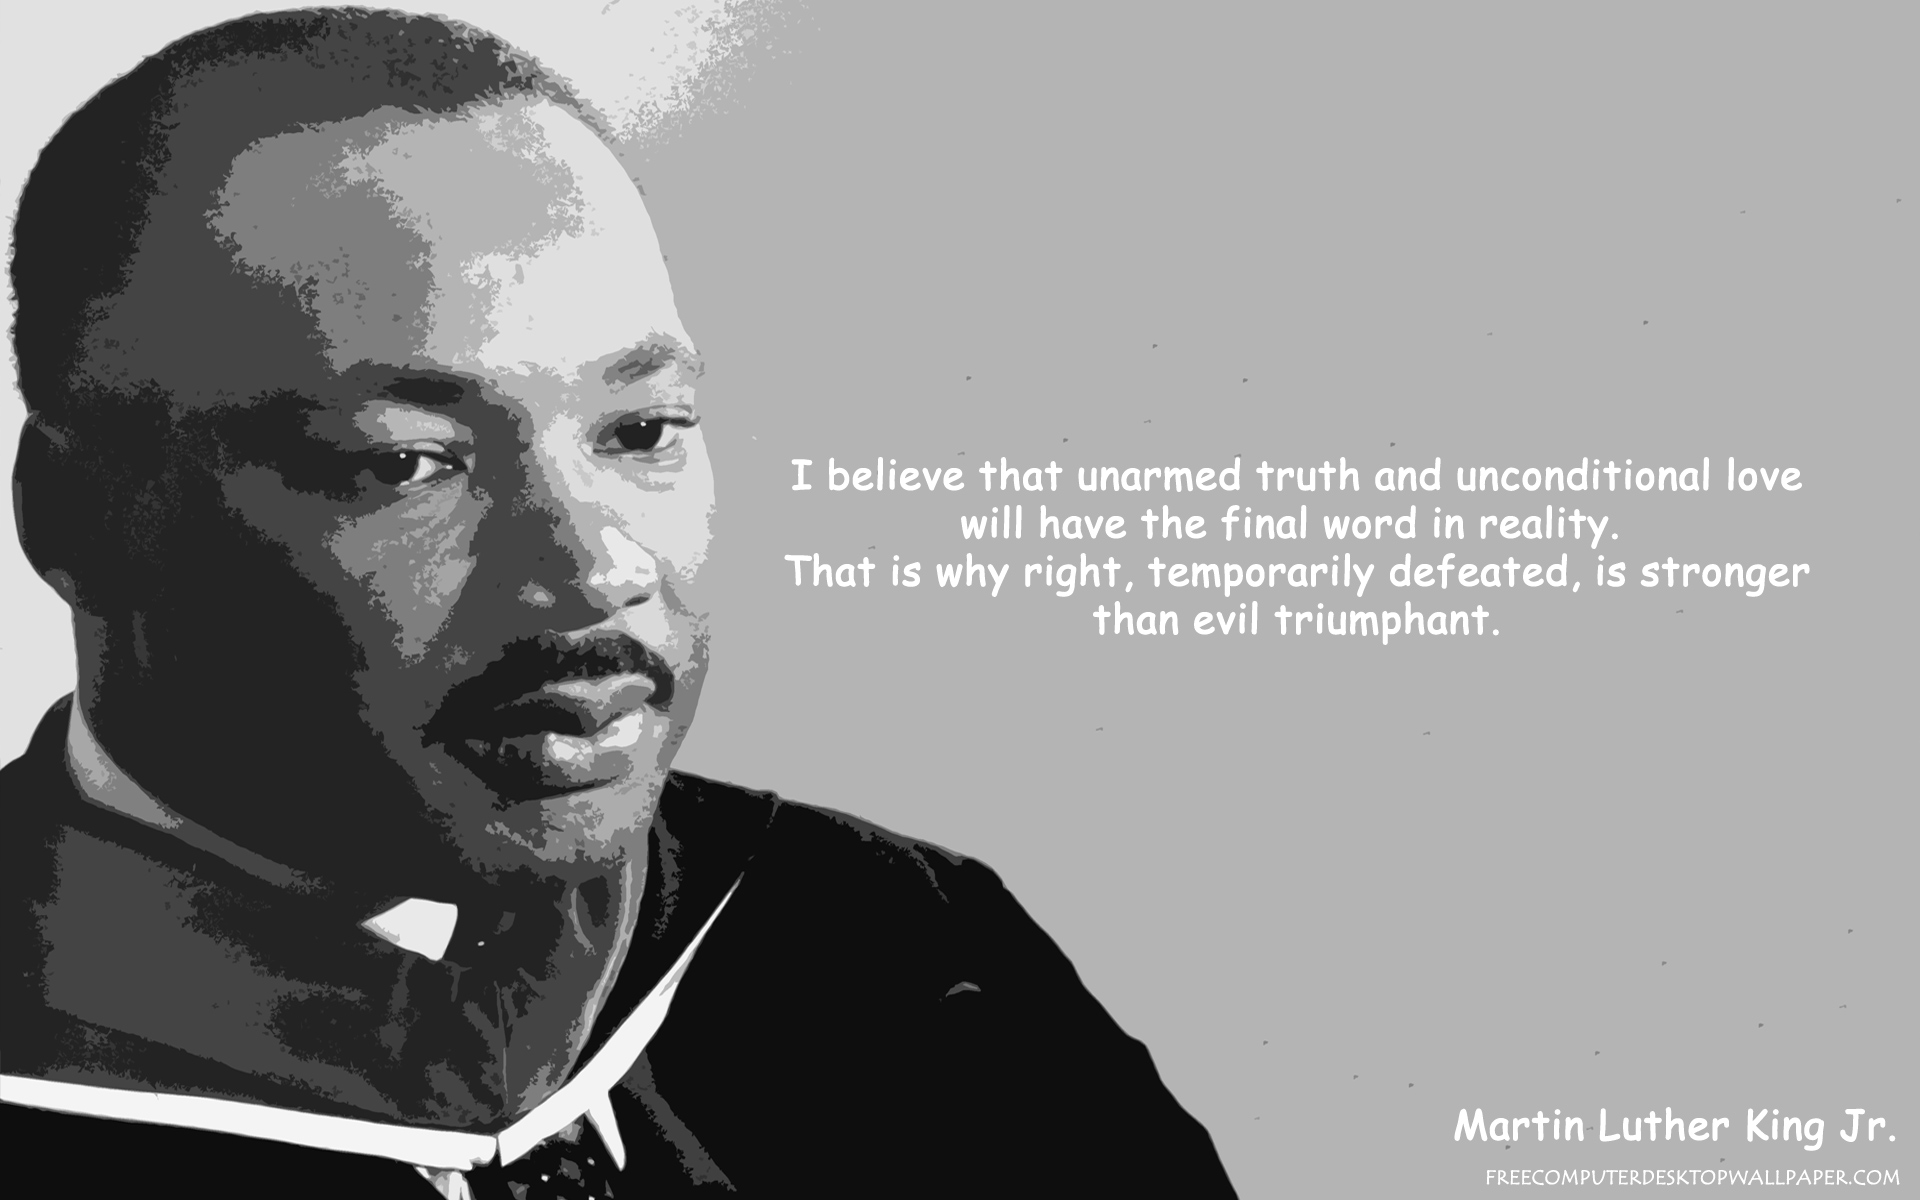 martin luther king jr wallpaper,text,font,photography,black and white,physicist